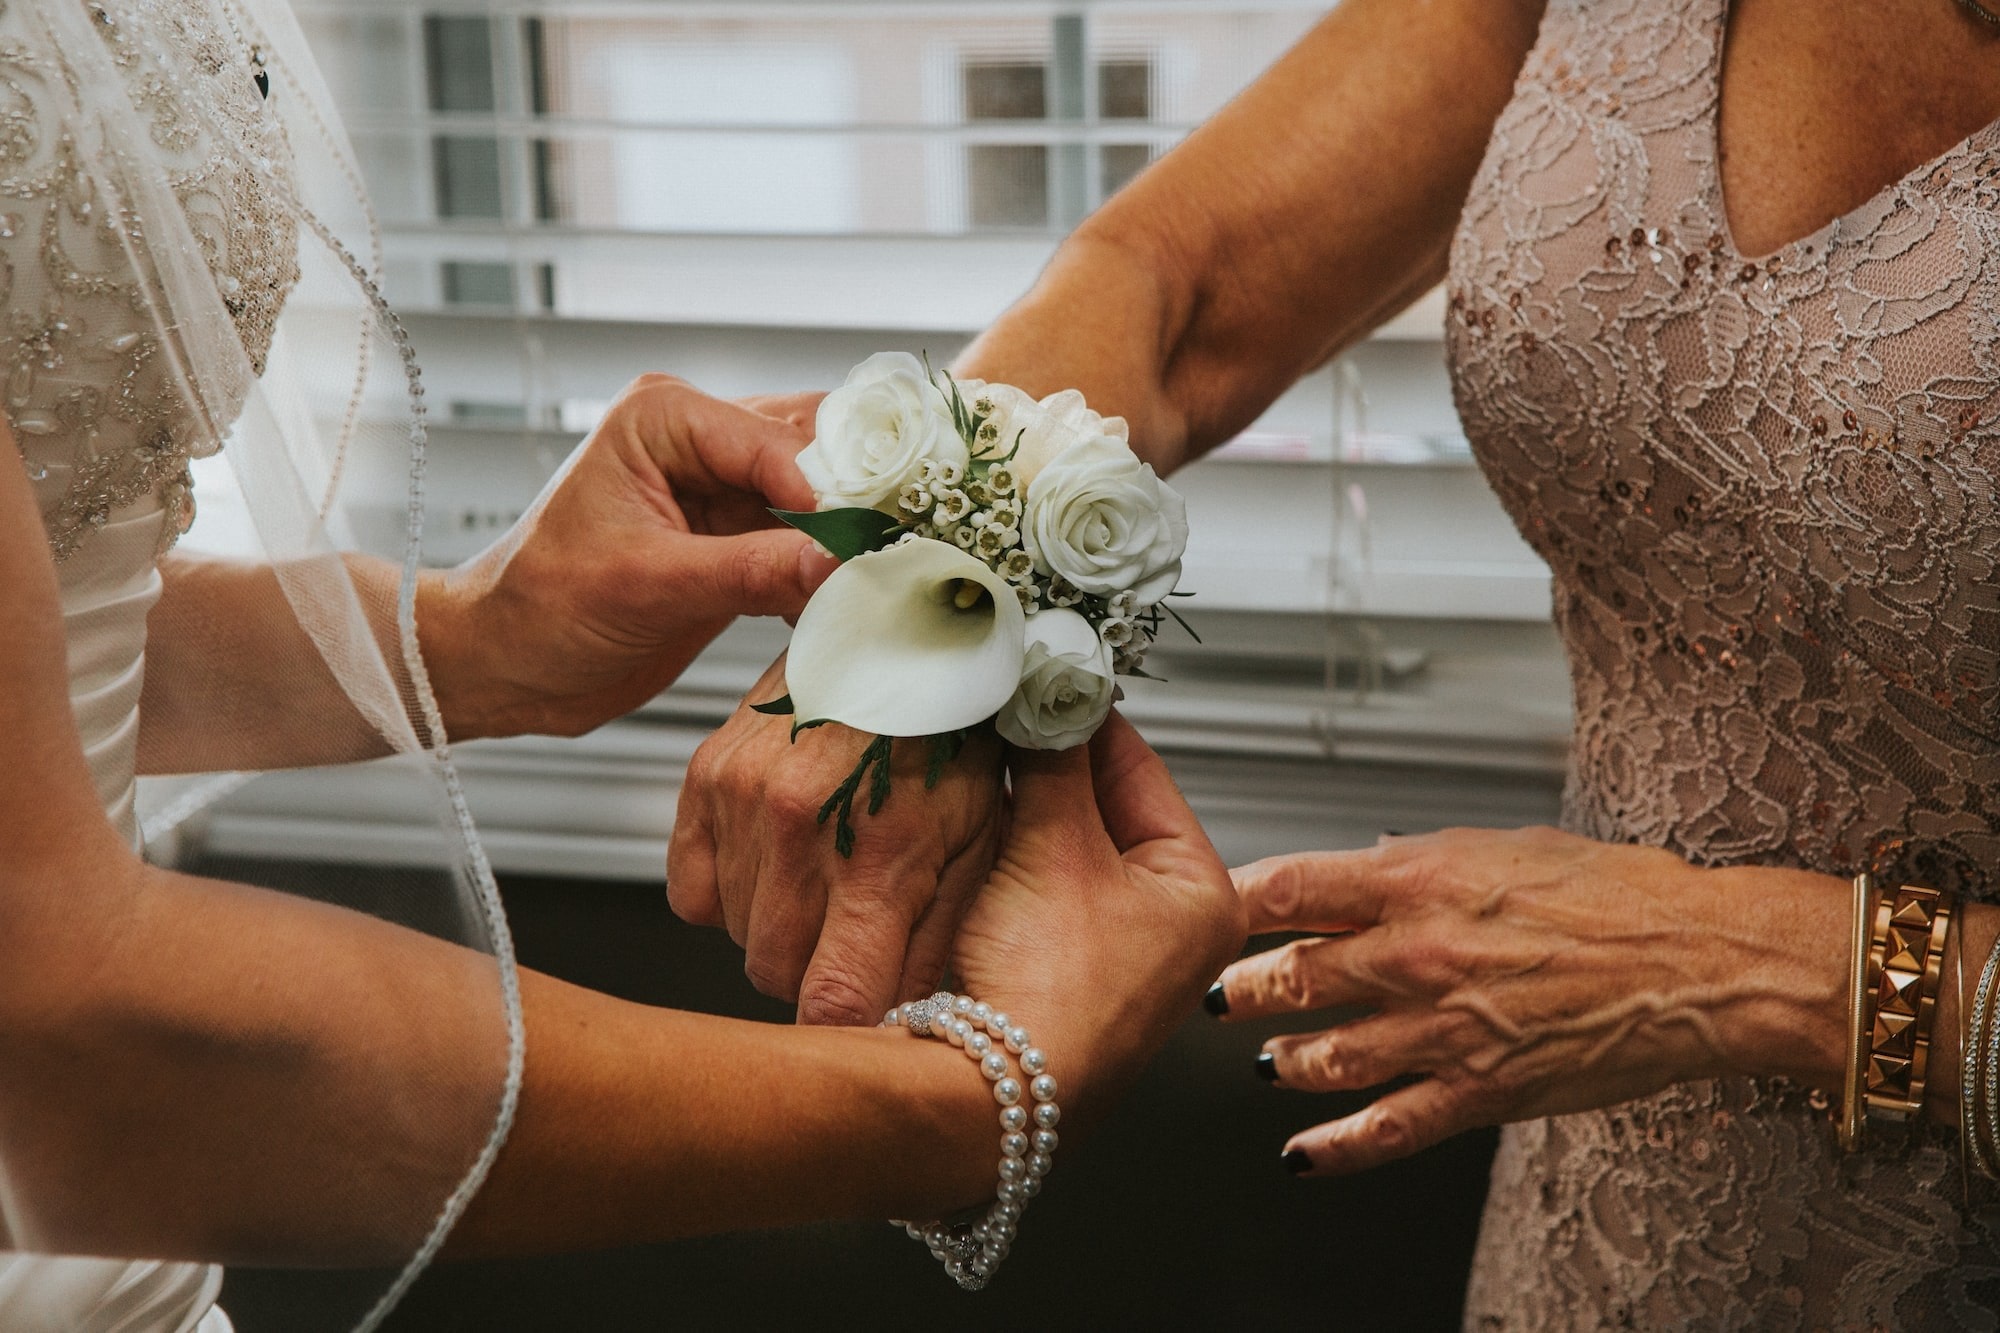 The Mother of the Bride may choose to place the veil on the Bride before the wedding ceremony to symbolize her last task that a Mother does on behalf of her gir